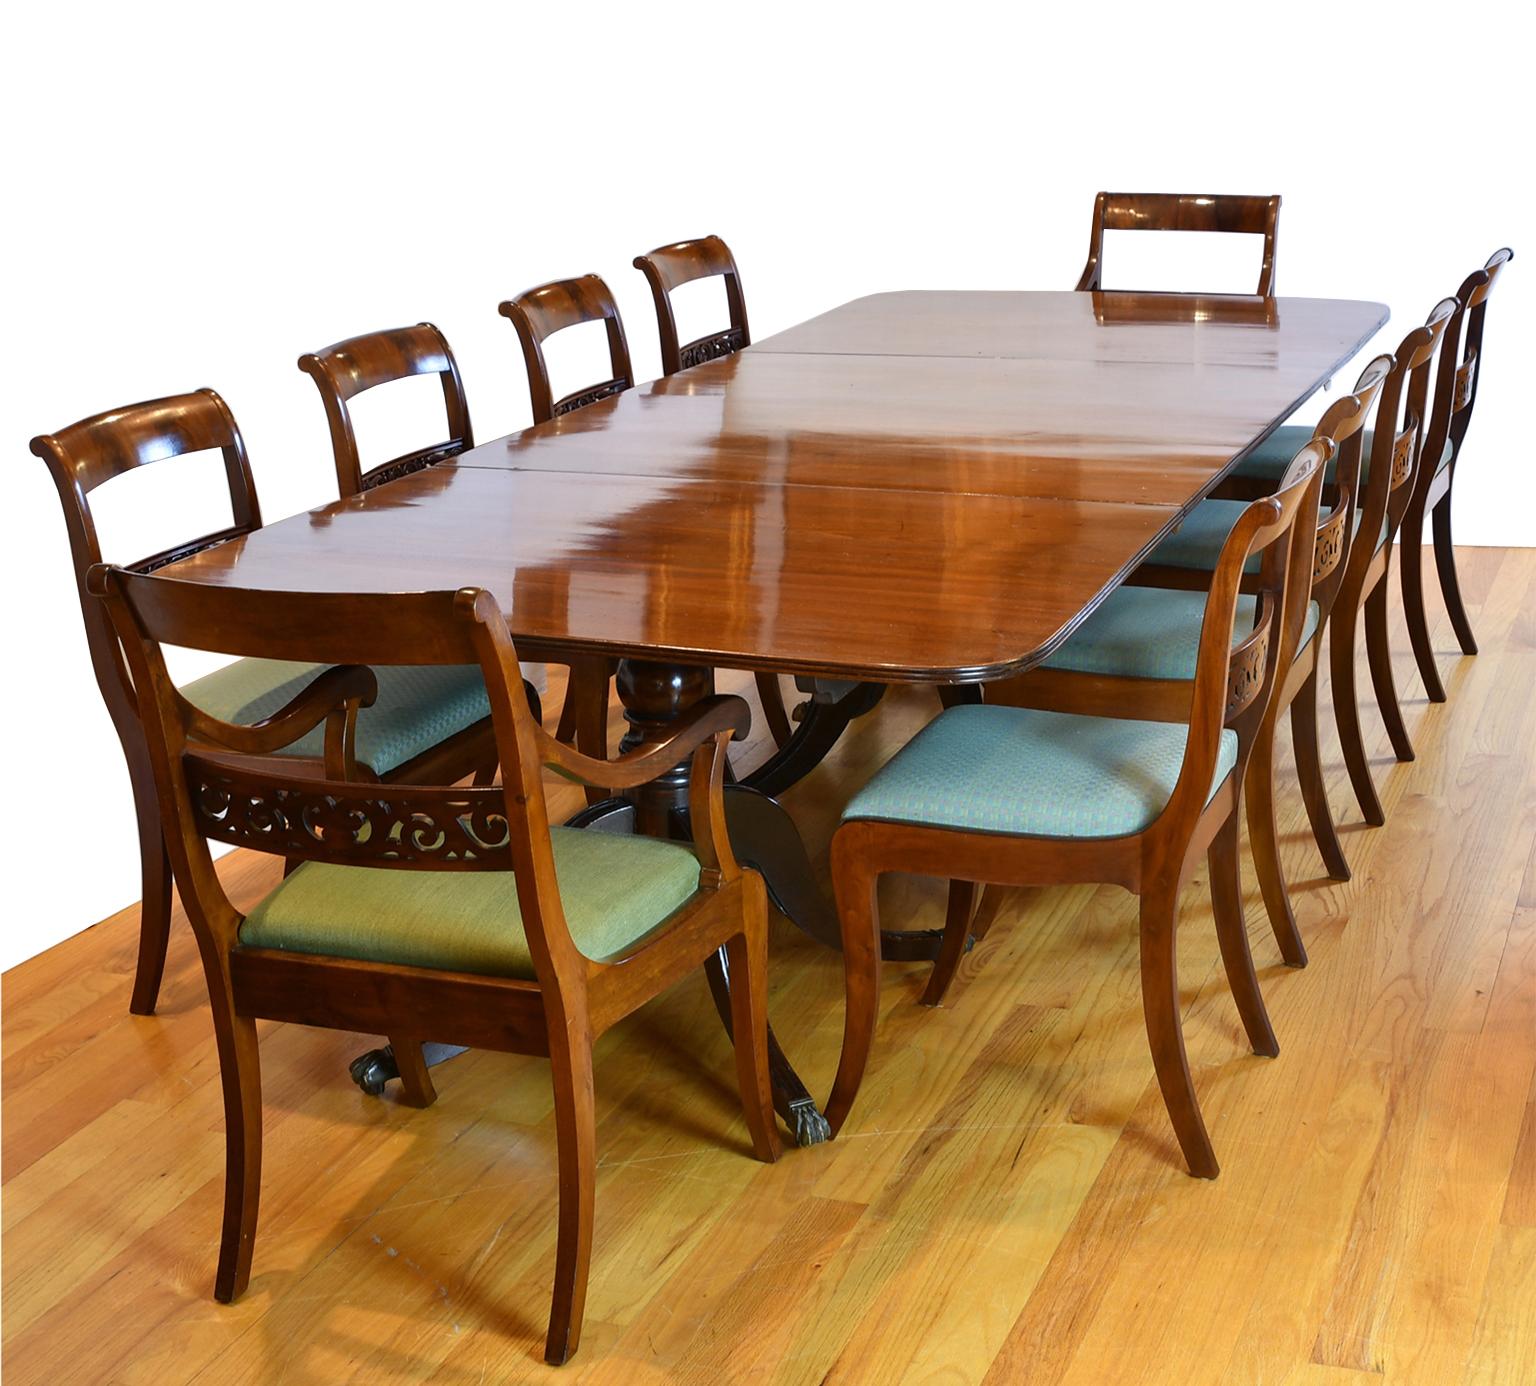 A very beautiful English Regency-style pedestal dining table from New York or Philadelphia in three parts in fine mahogany. Each of the three pedestals features a baluster-turned column with four reeded 